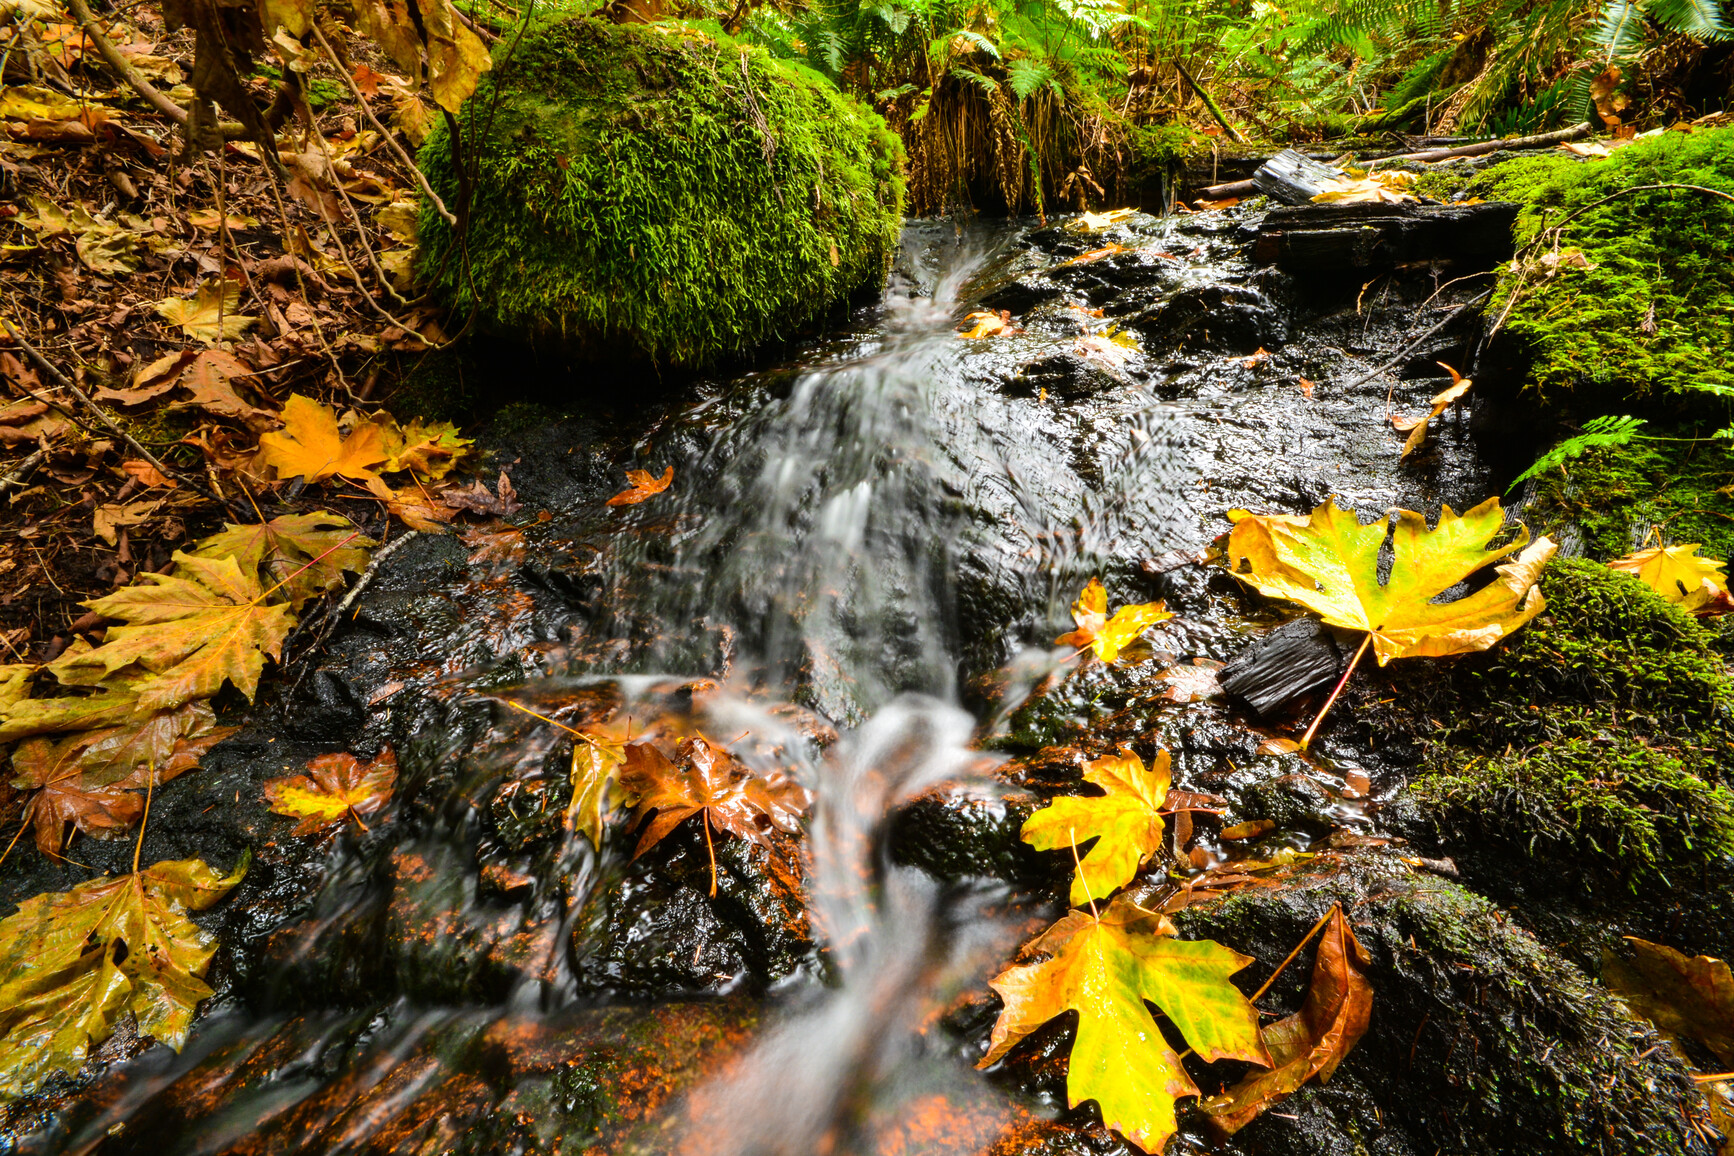 Creek flowing over rocks. Ferns and mosses cover the ground. Autumn leaves have fallen around the creek.